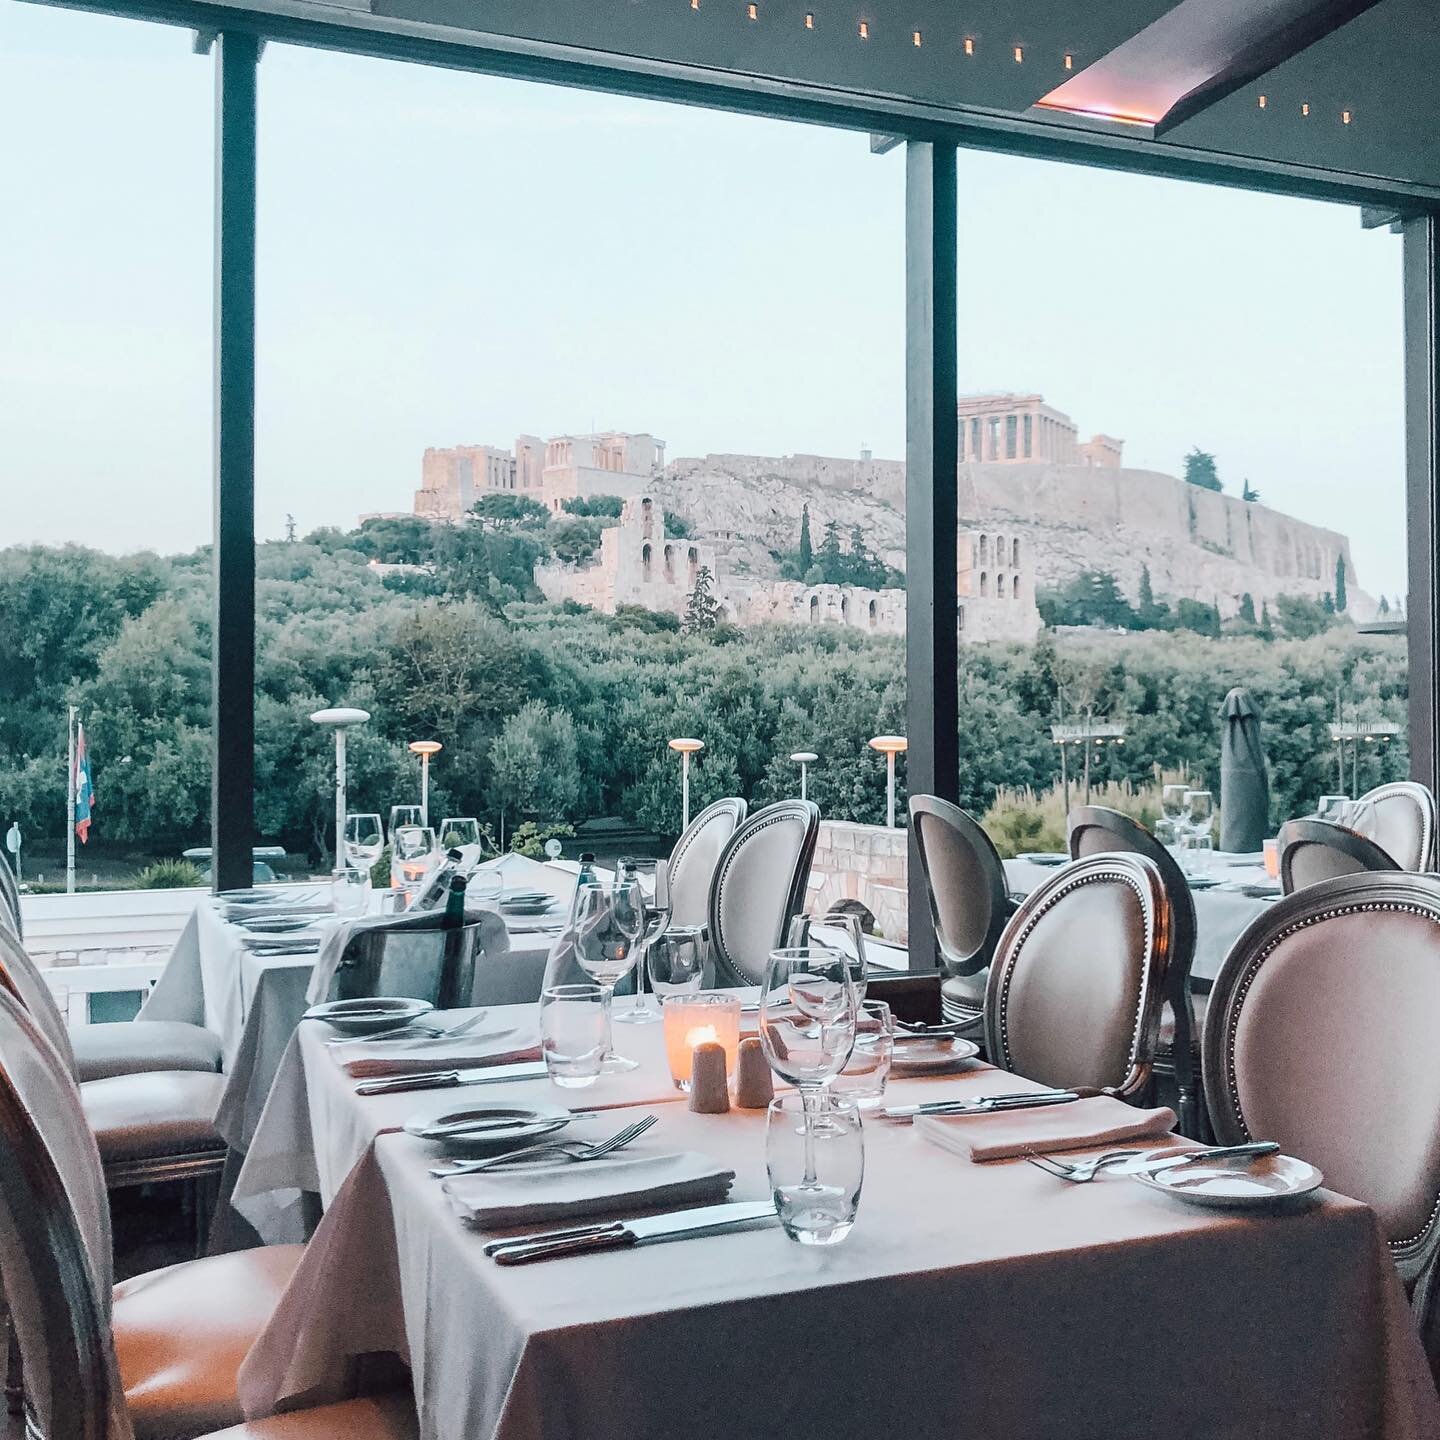 Dinner with a view of the Acropolis at sunset. The food was fantastic. Dessert is made table side. Such a treat!  One of the many stops we recommend for our travelers in Athens, Greece.